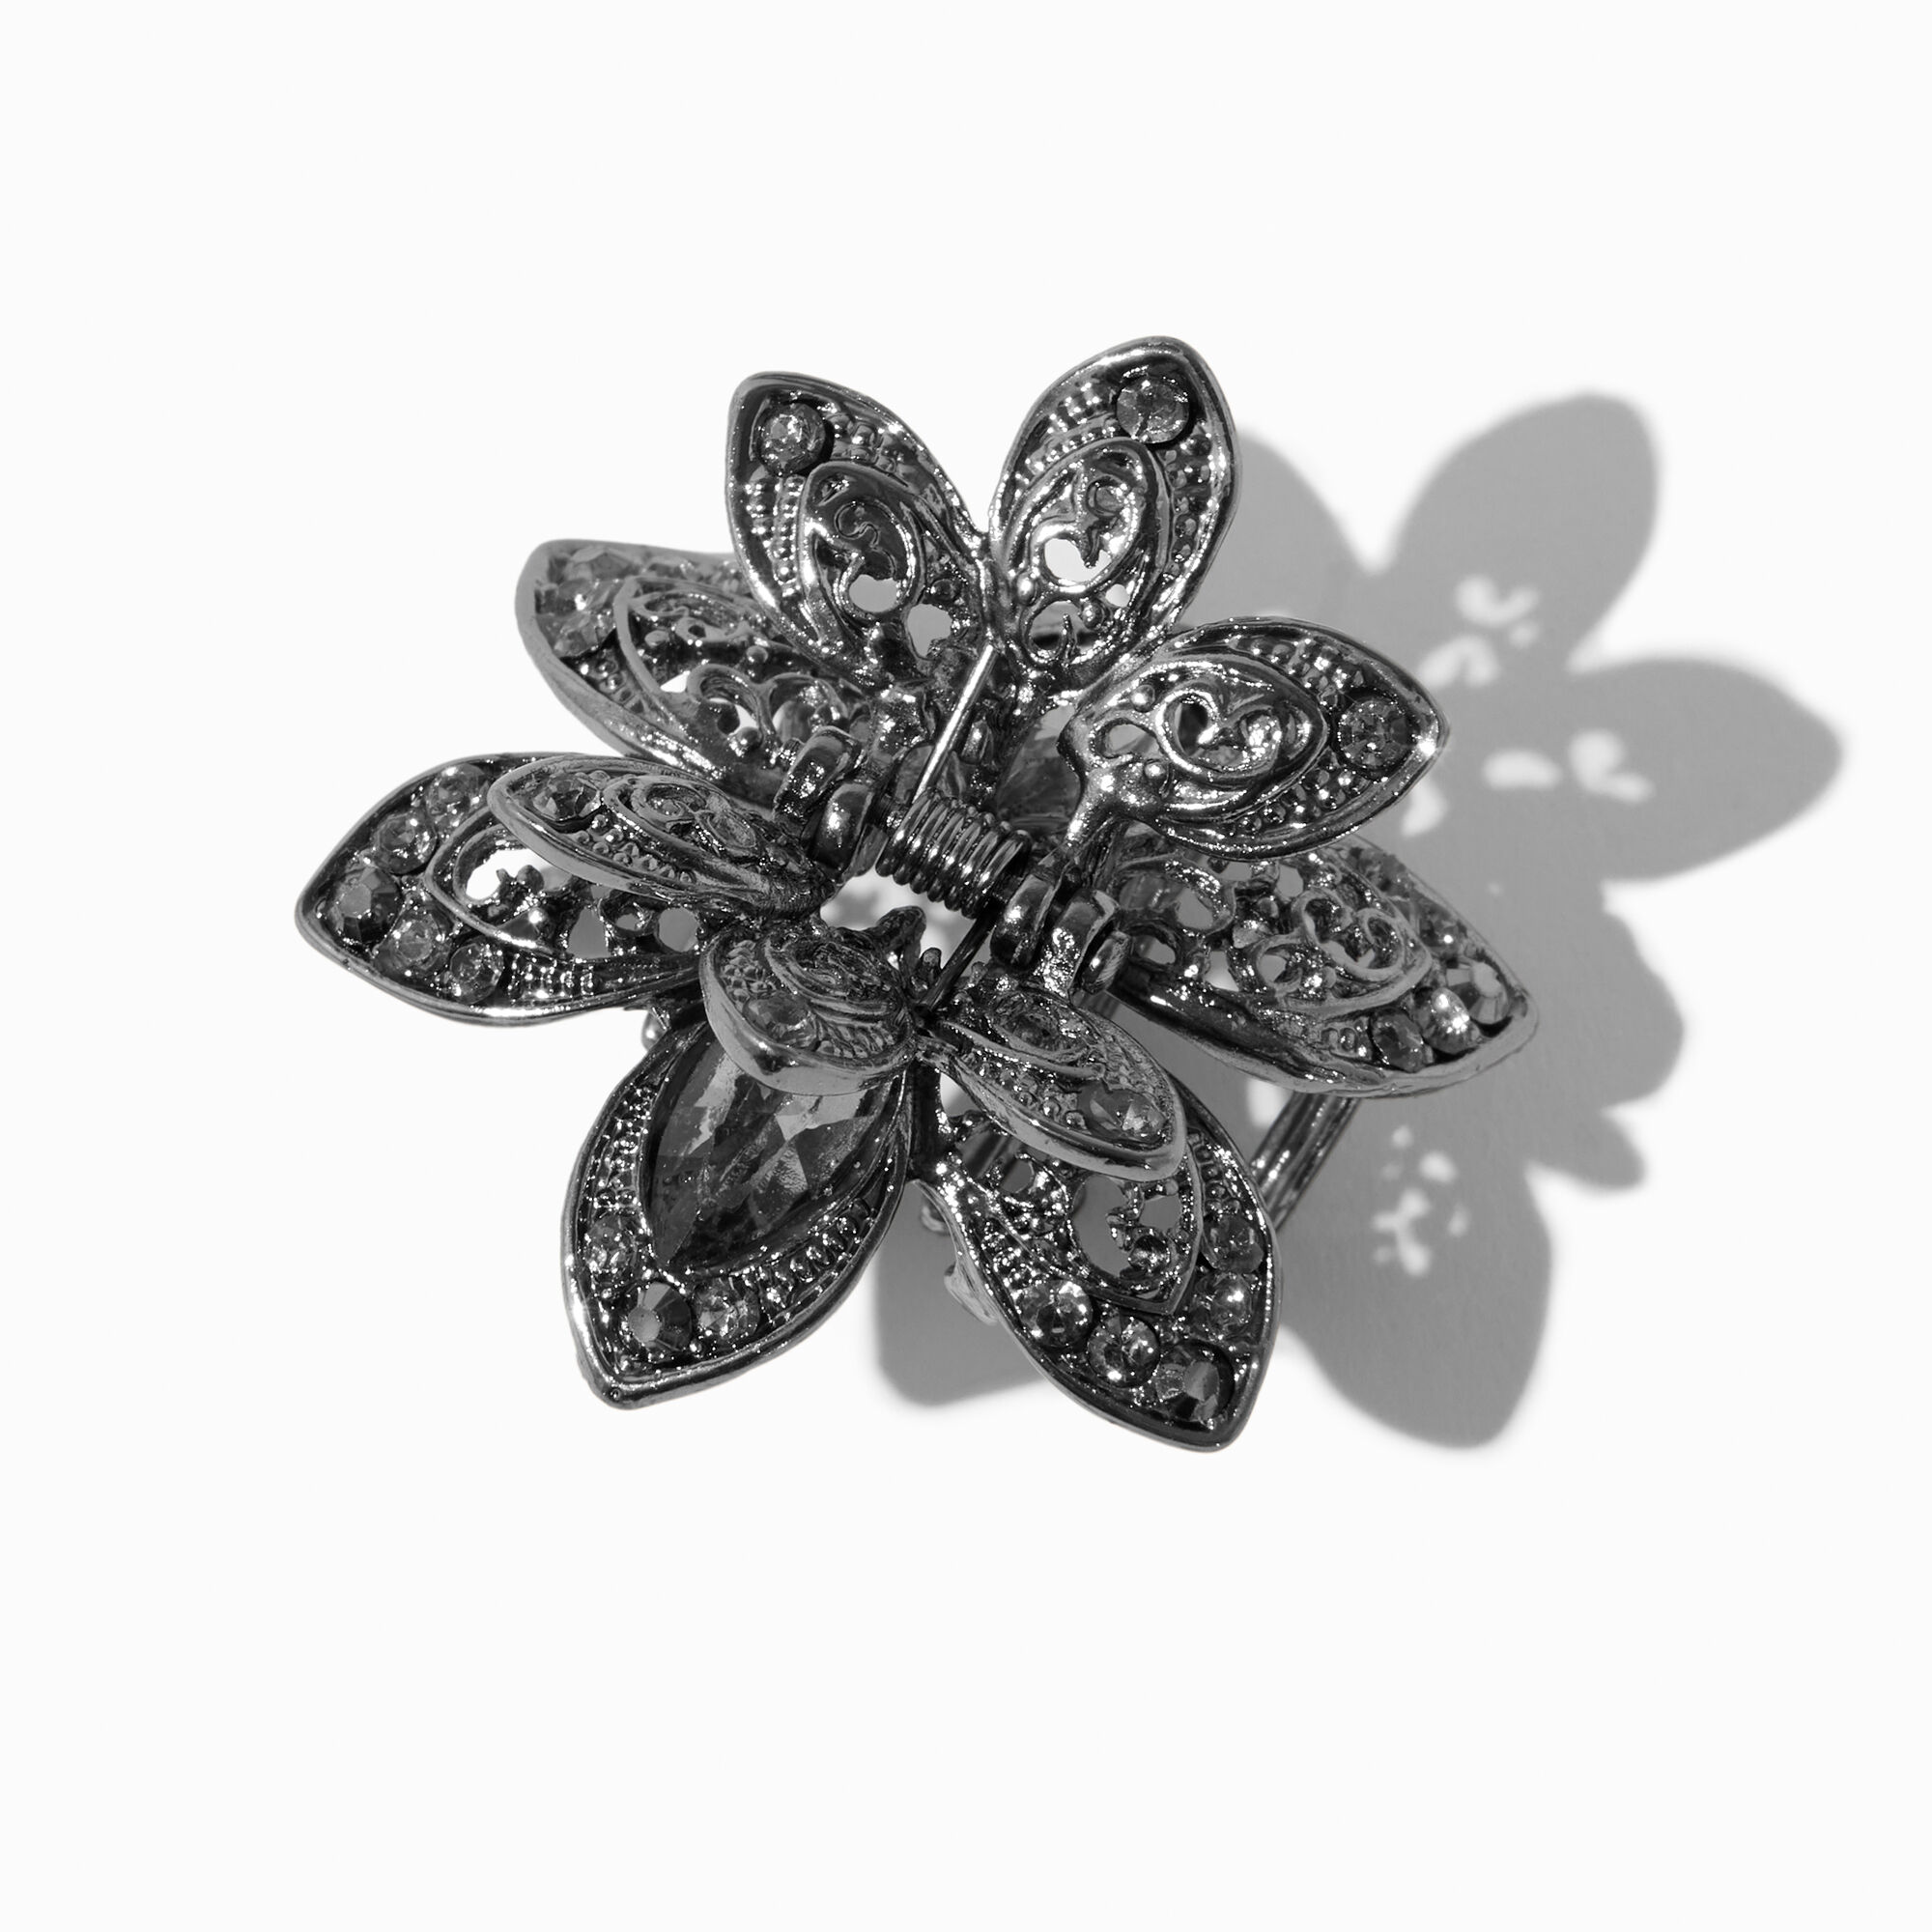 View Claires Hematite Crystal Embellished Filigree Flower Hair Claw information